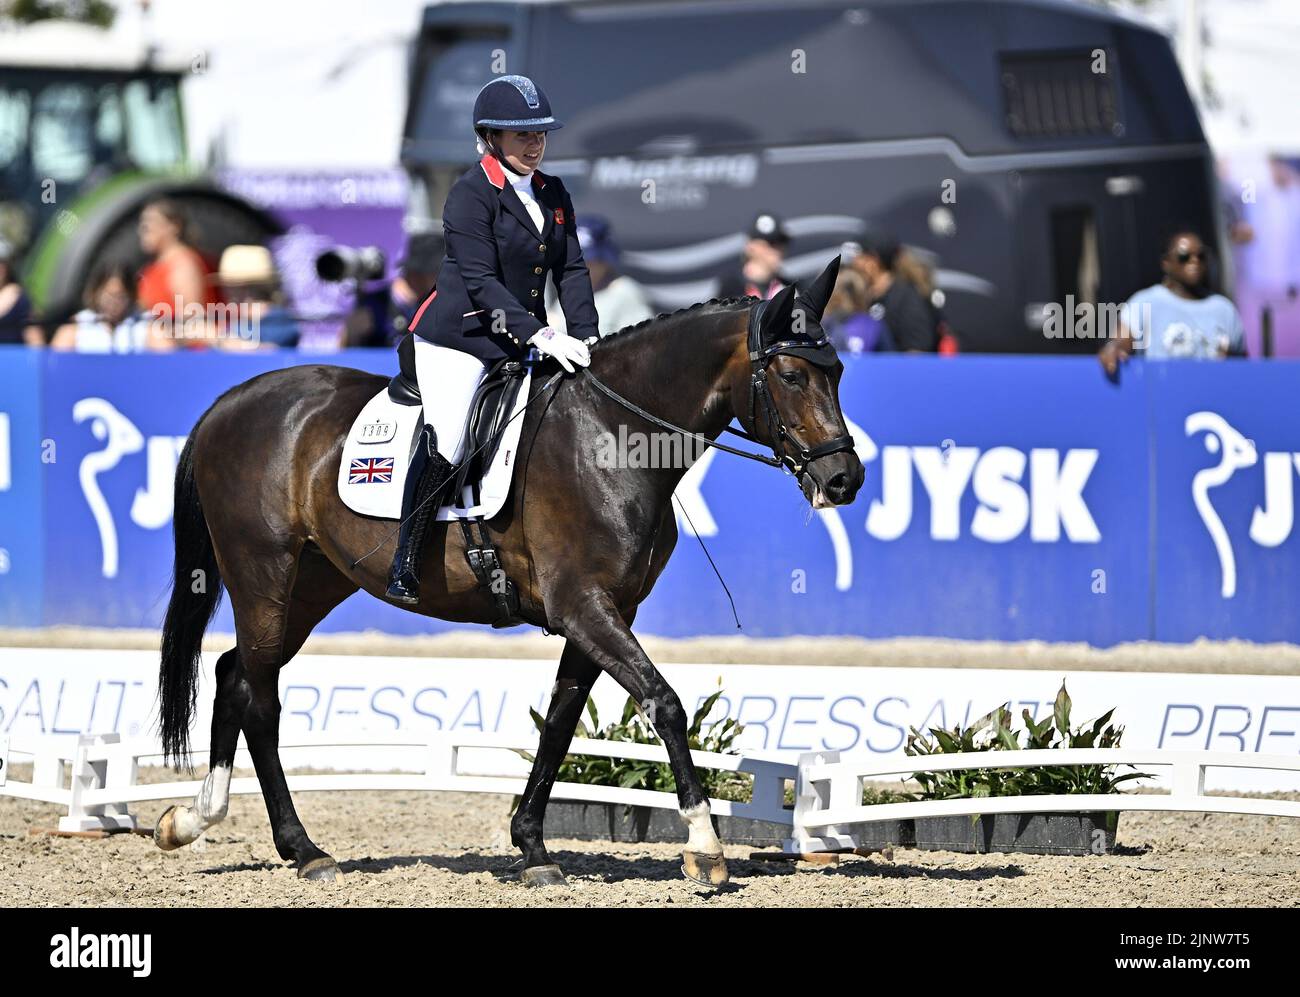 Herning, Denmark. 13th Aug, 2022. World Equestrian Games.Natasha Baker (GBR) riding KEYSTONE DAWN CHORUS during the FEI Para Dressage Team championships - Grade III. Credit: Sport In Pictures/Alamy Live News Stock Photo